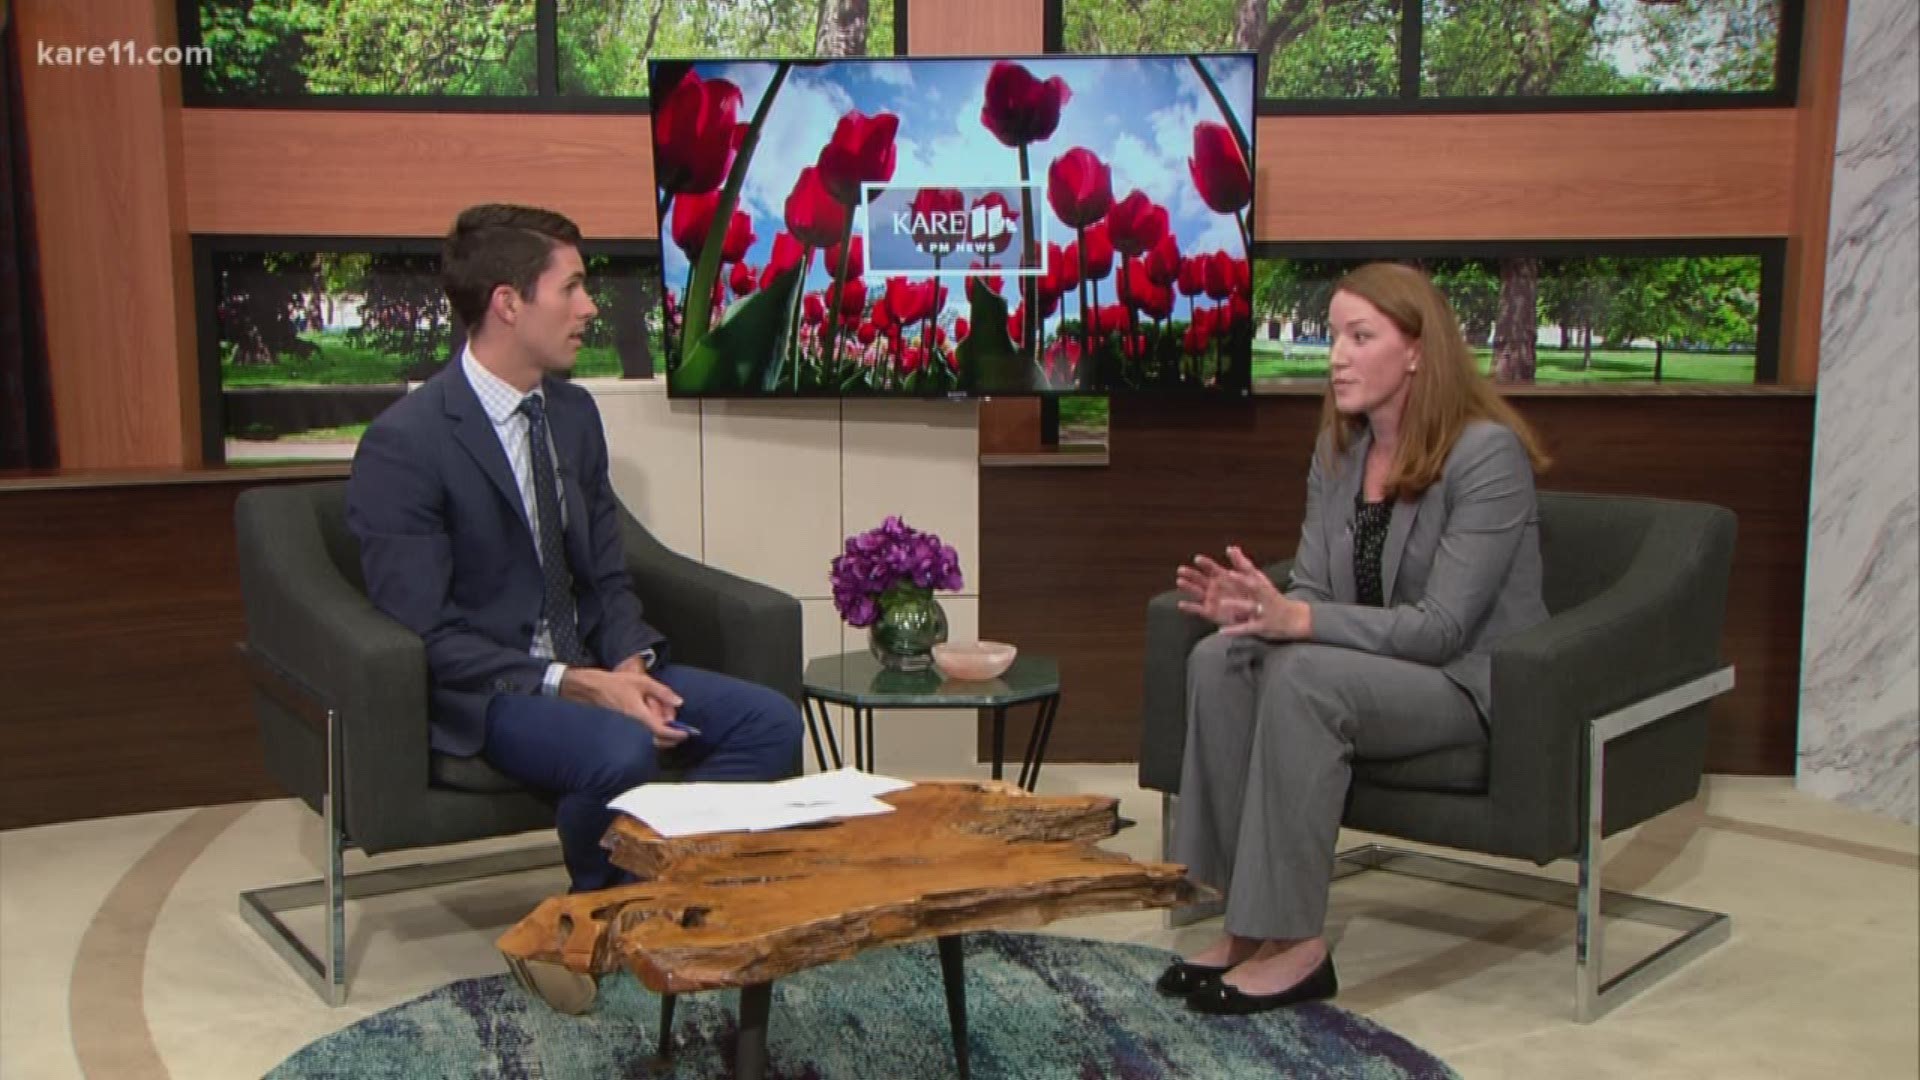 Dr. Eleanor Orehek with Noran Neurological Clinic and Abbott Northwestern joined us to talk about how new treatments are helping people with Parkinson's live life to the fullest.